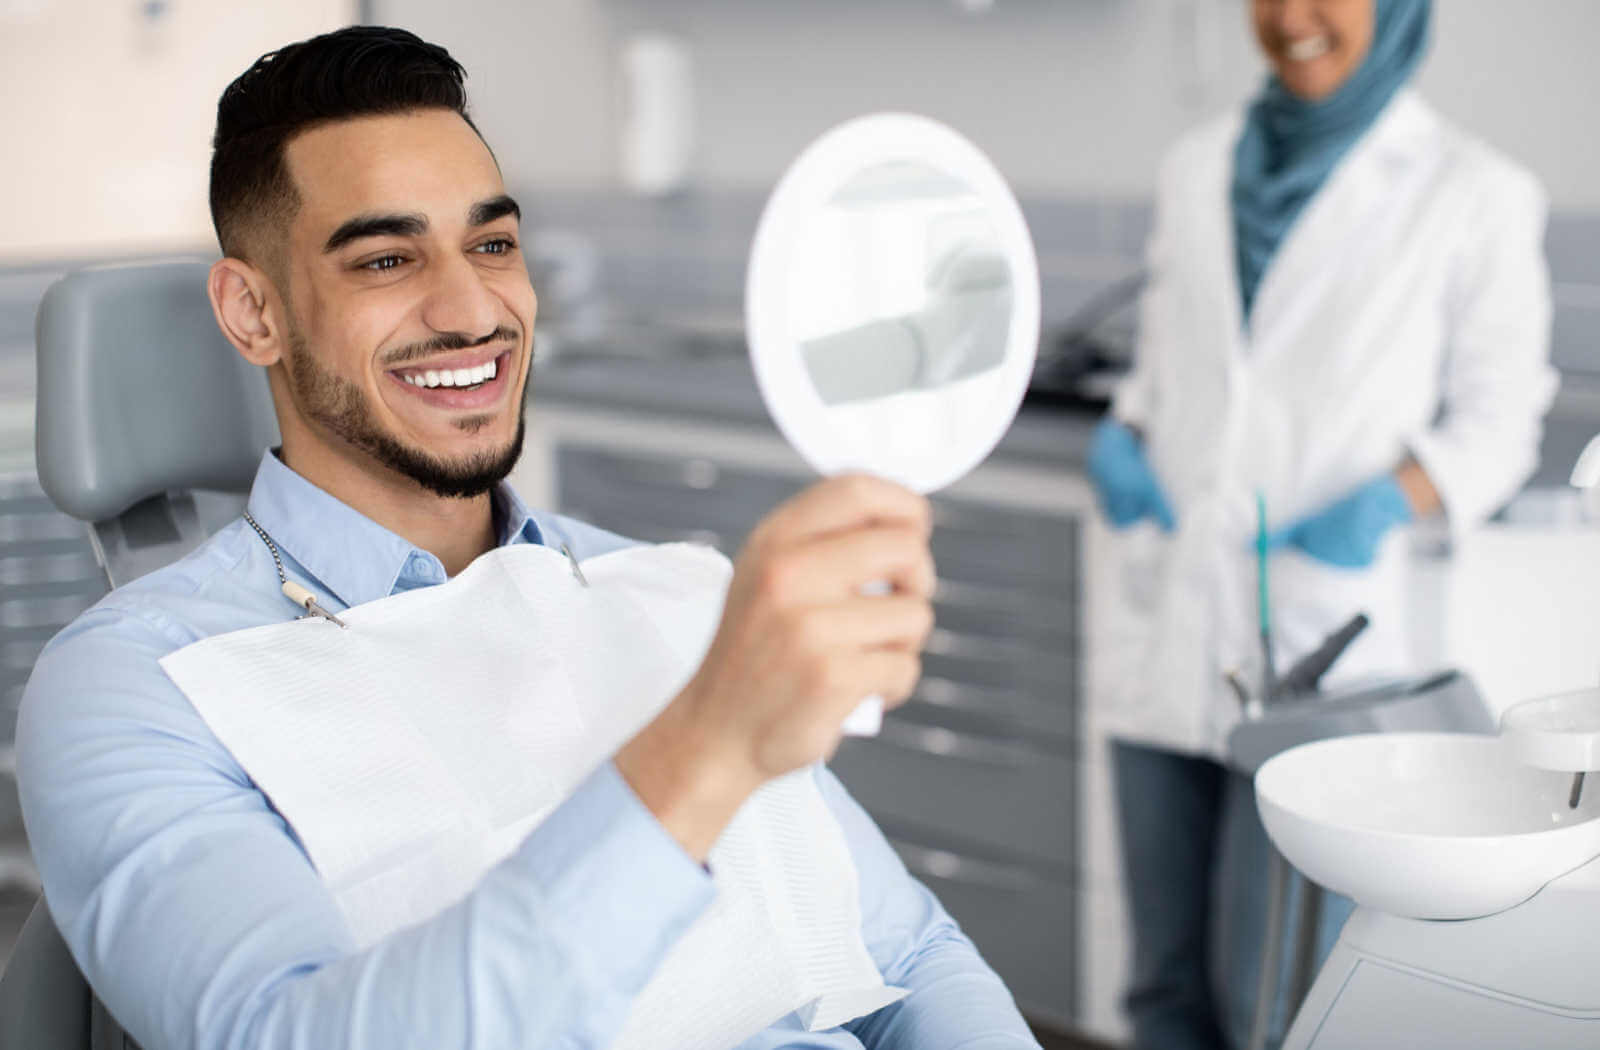 A man sitting on a dental chair with a mirror in his hand and checking his new veneers with a big smile on his face.